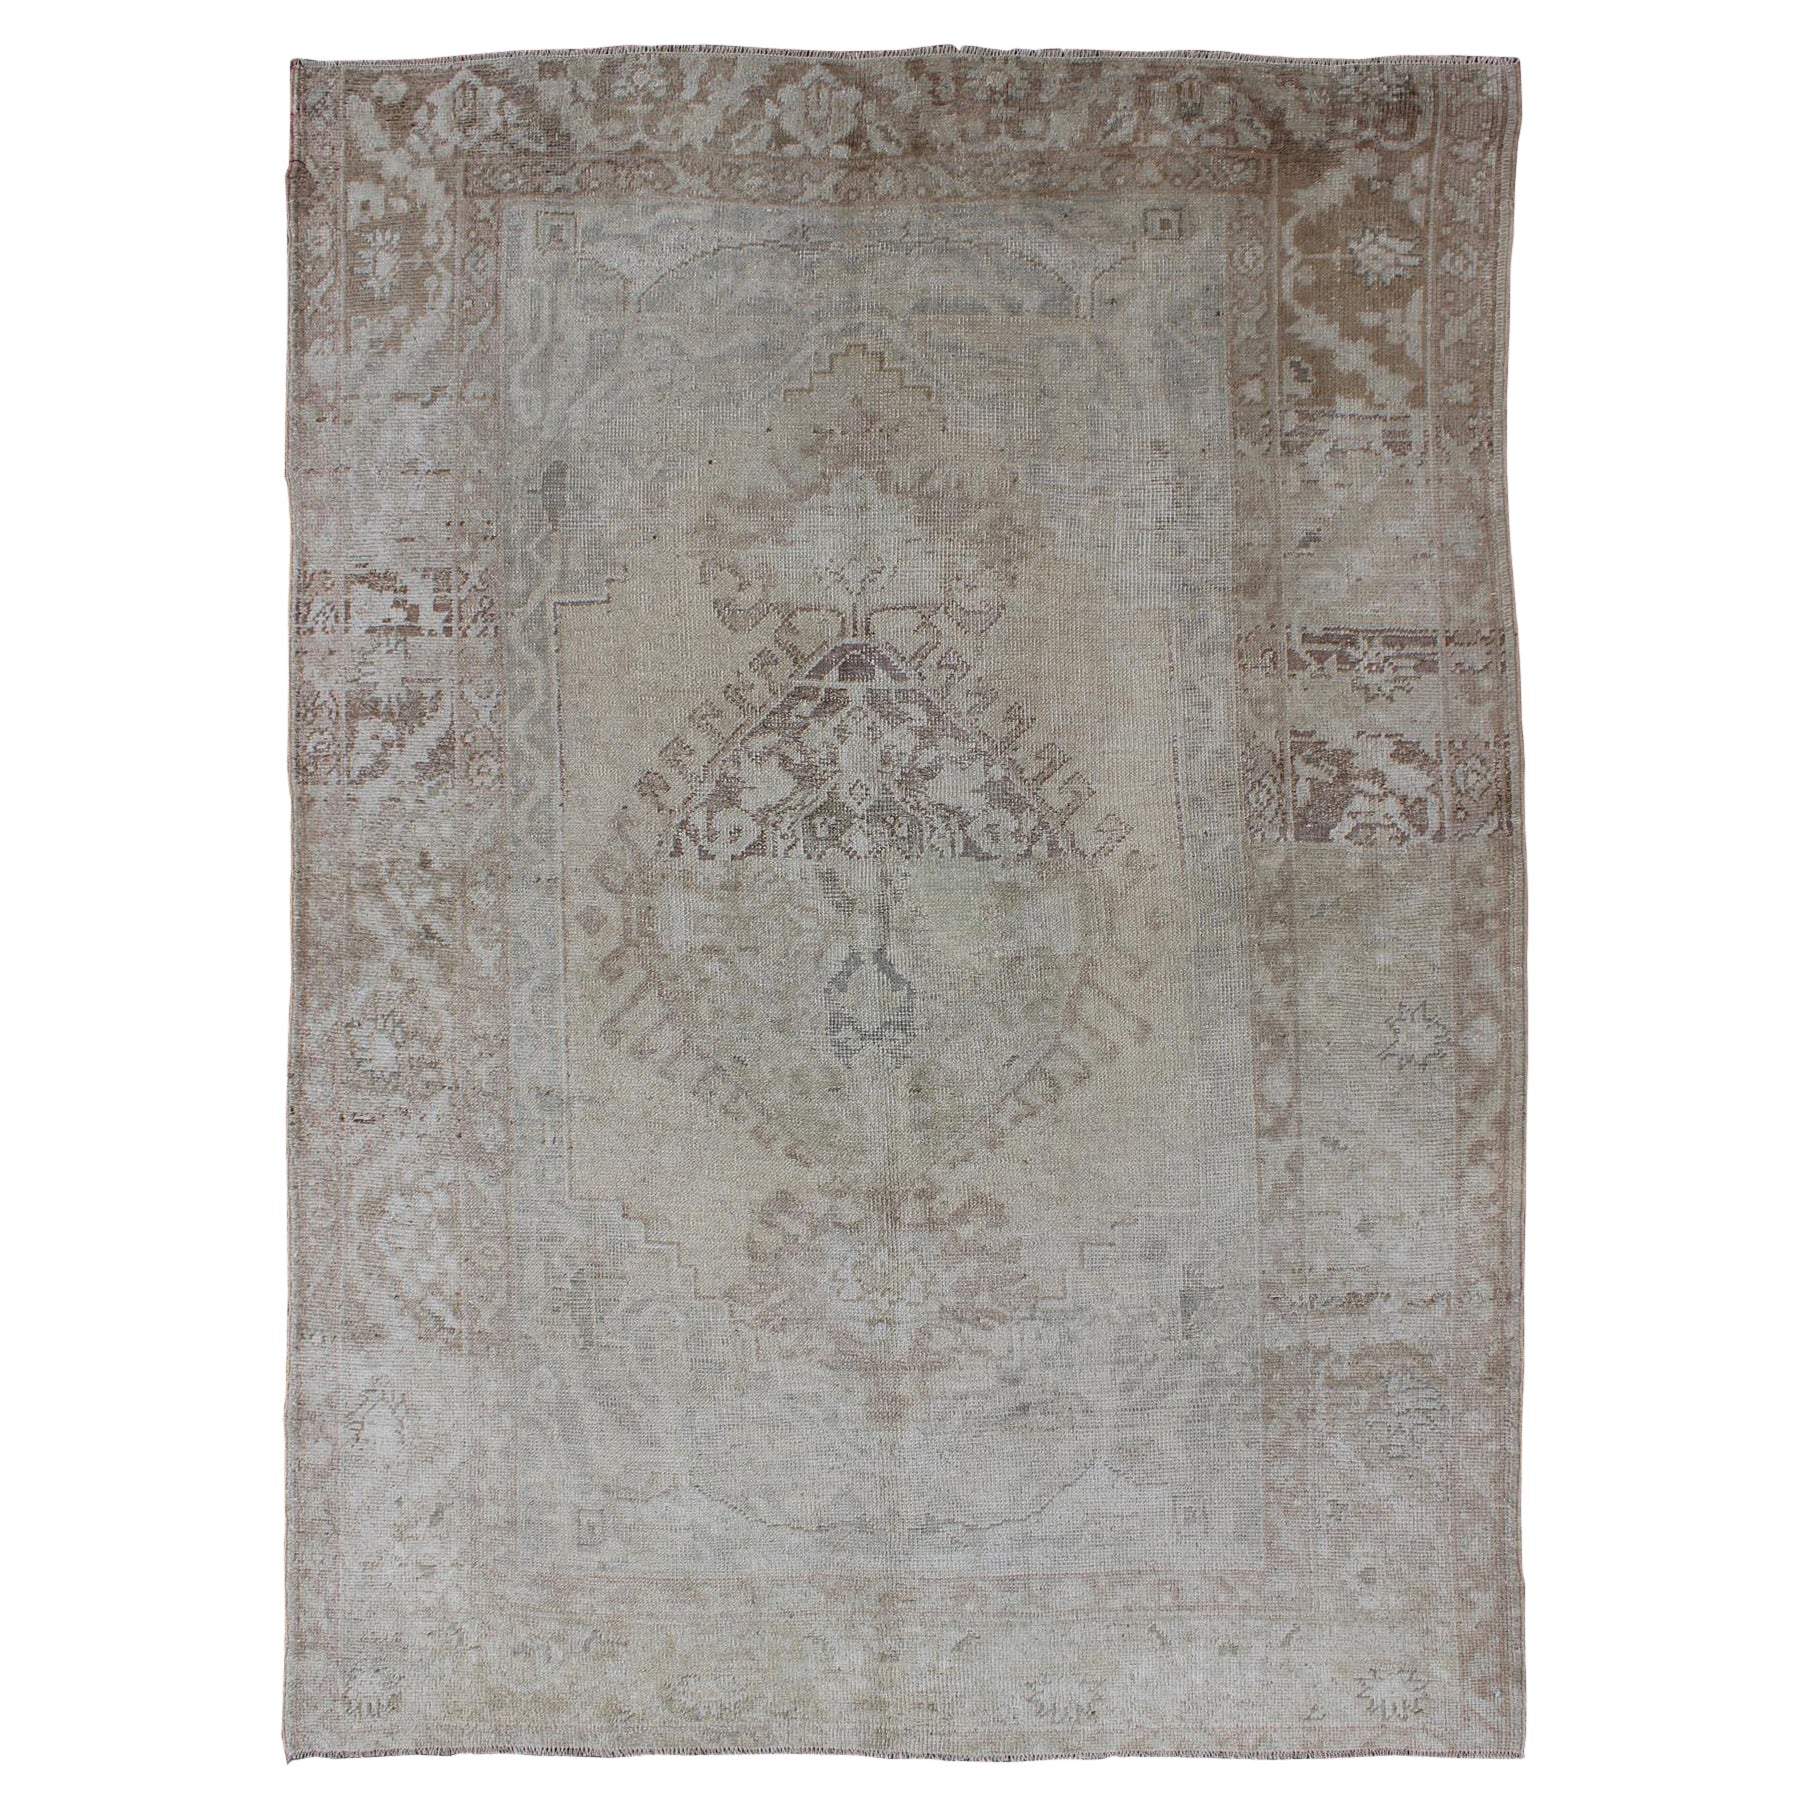 Earth Tones Antique Turkish Oushak Rug with Faded Colors in Medallion Design